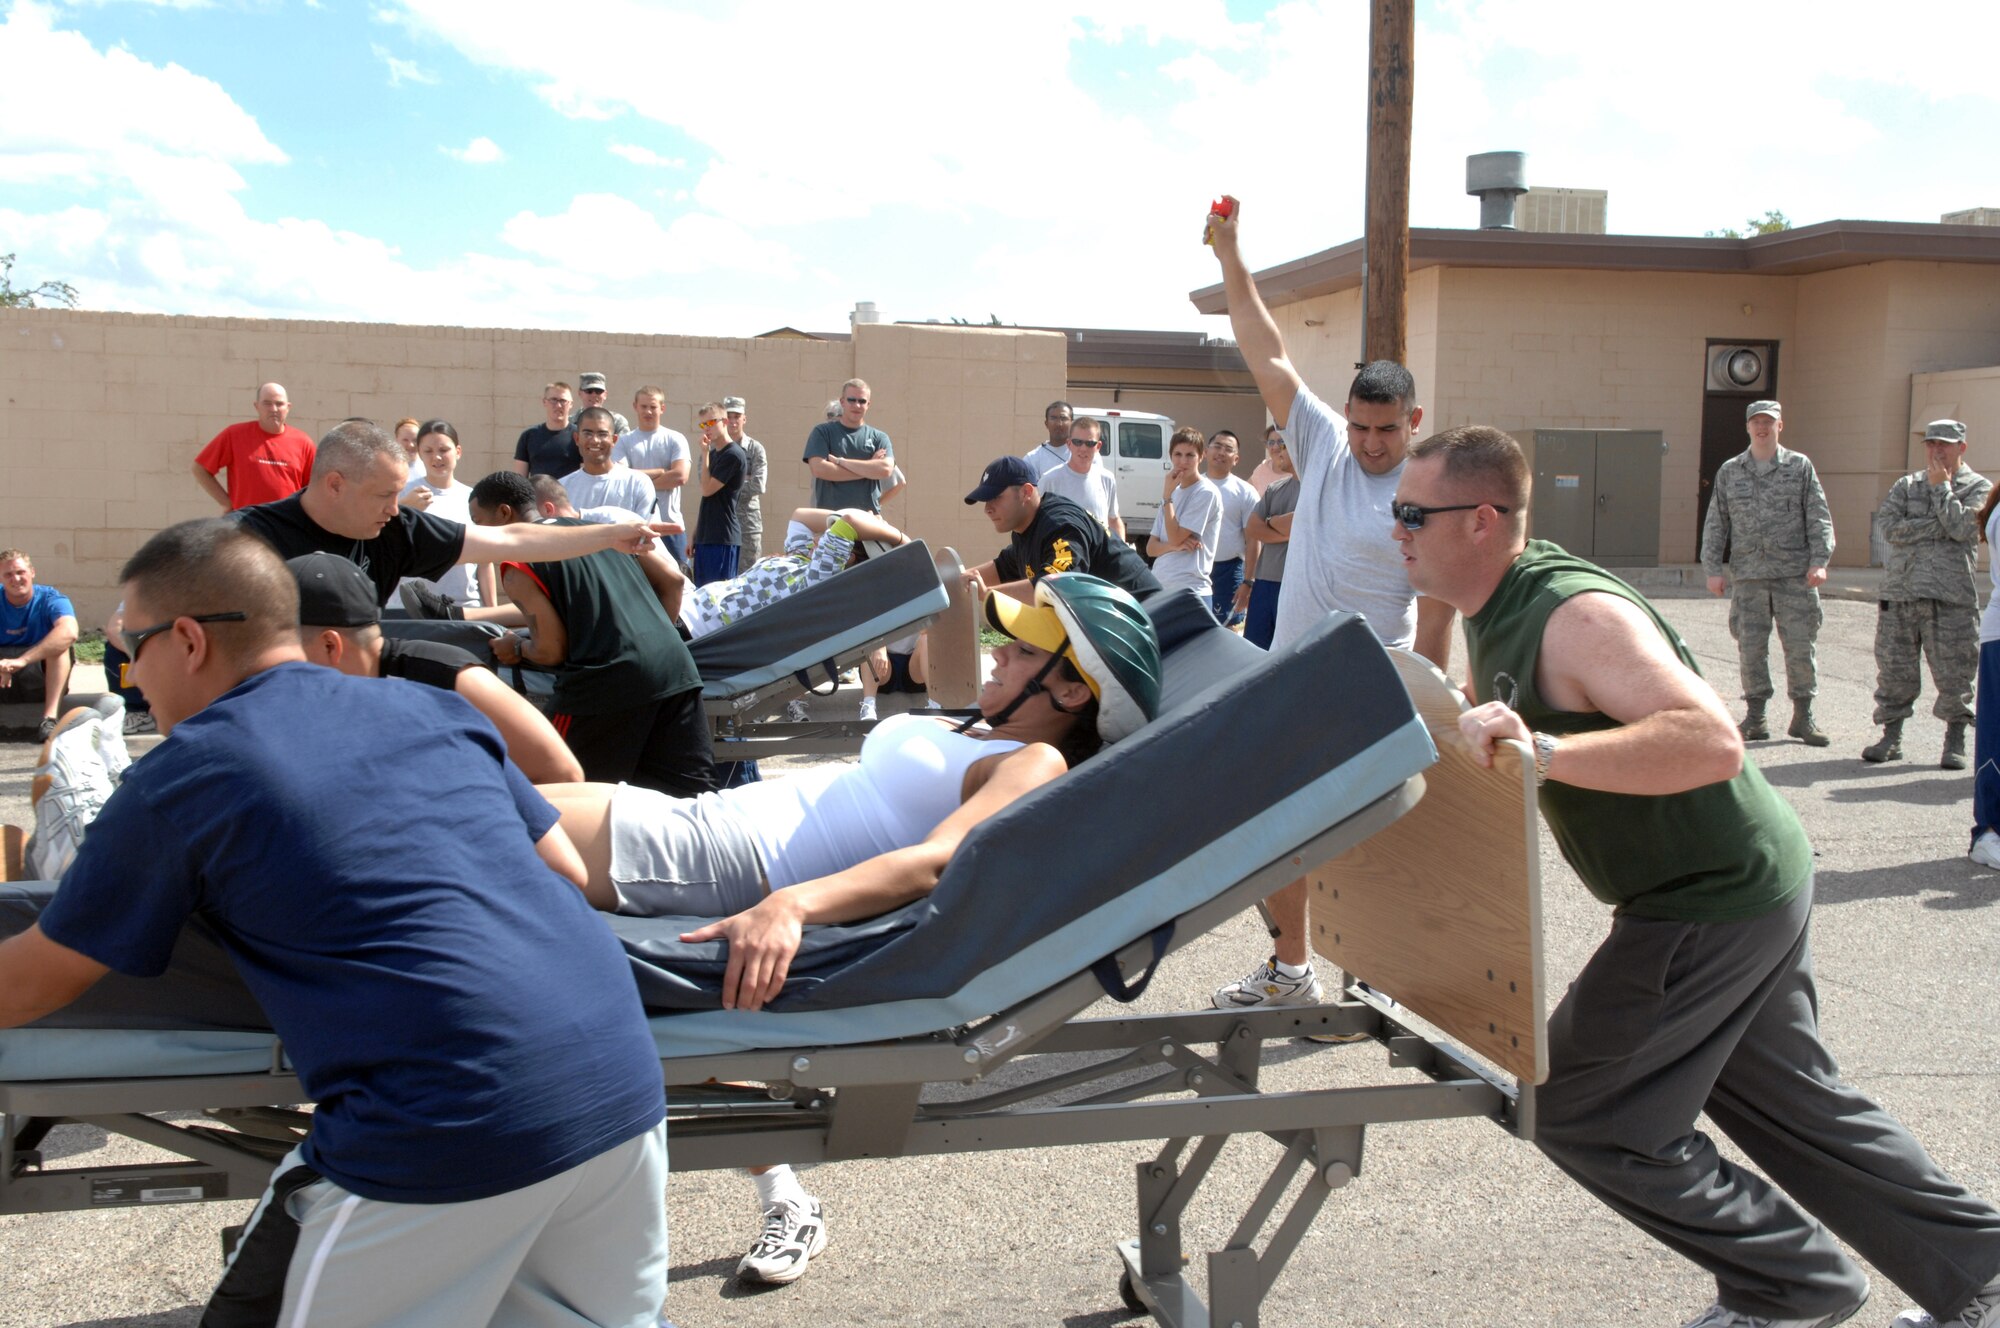 49th Materiel Maintenance Suppport Squadron team member, Airman 1st Class Bianca Rivera, holds on tight for a bed race against the 49th Security Forces team members at Holloman Air Force Base, N.M., October 10, during Sports Day. Staff Sgt. Noe Gutierrez sounds off the air horn for contestants to begin the race. (U.S. Air Force photo/Airman 1st Class Veronica Salgado) 